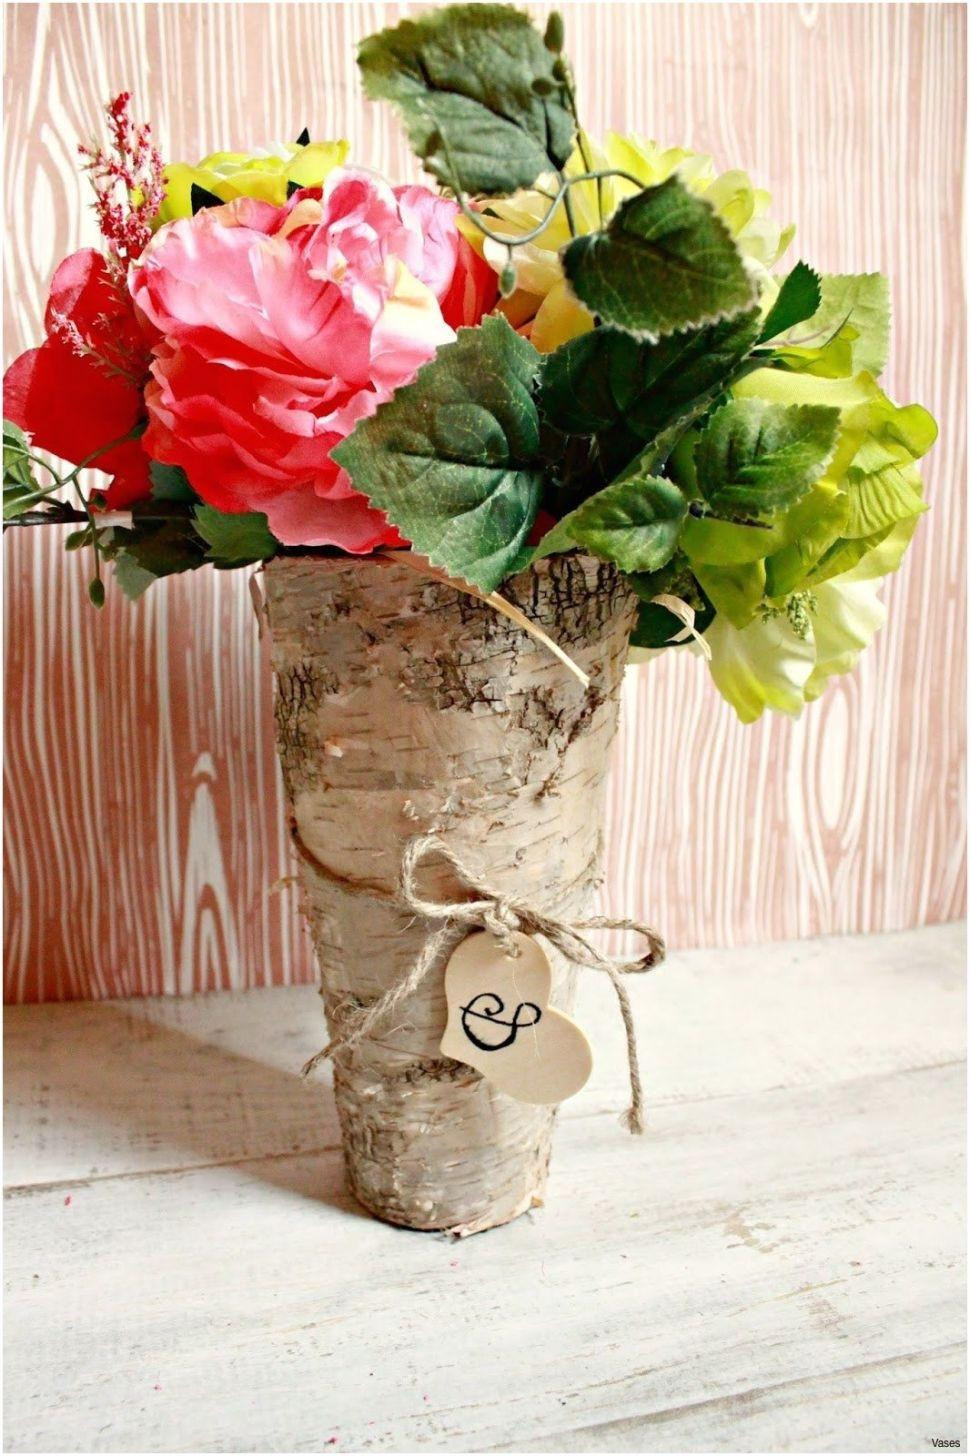 16 Popular Vase Fillers for Wedding Centerpieces 2024 free download vase fillers for wedding centerpieces of diy centerpiece ideas luxury best 15 cheap and easy diy vase filler within vases square centerpiece diy centerpiece ideas fresh 35 luxury diy wedding